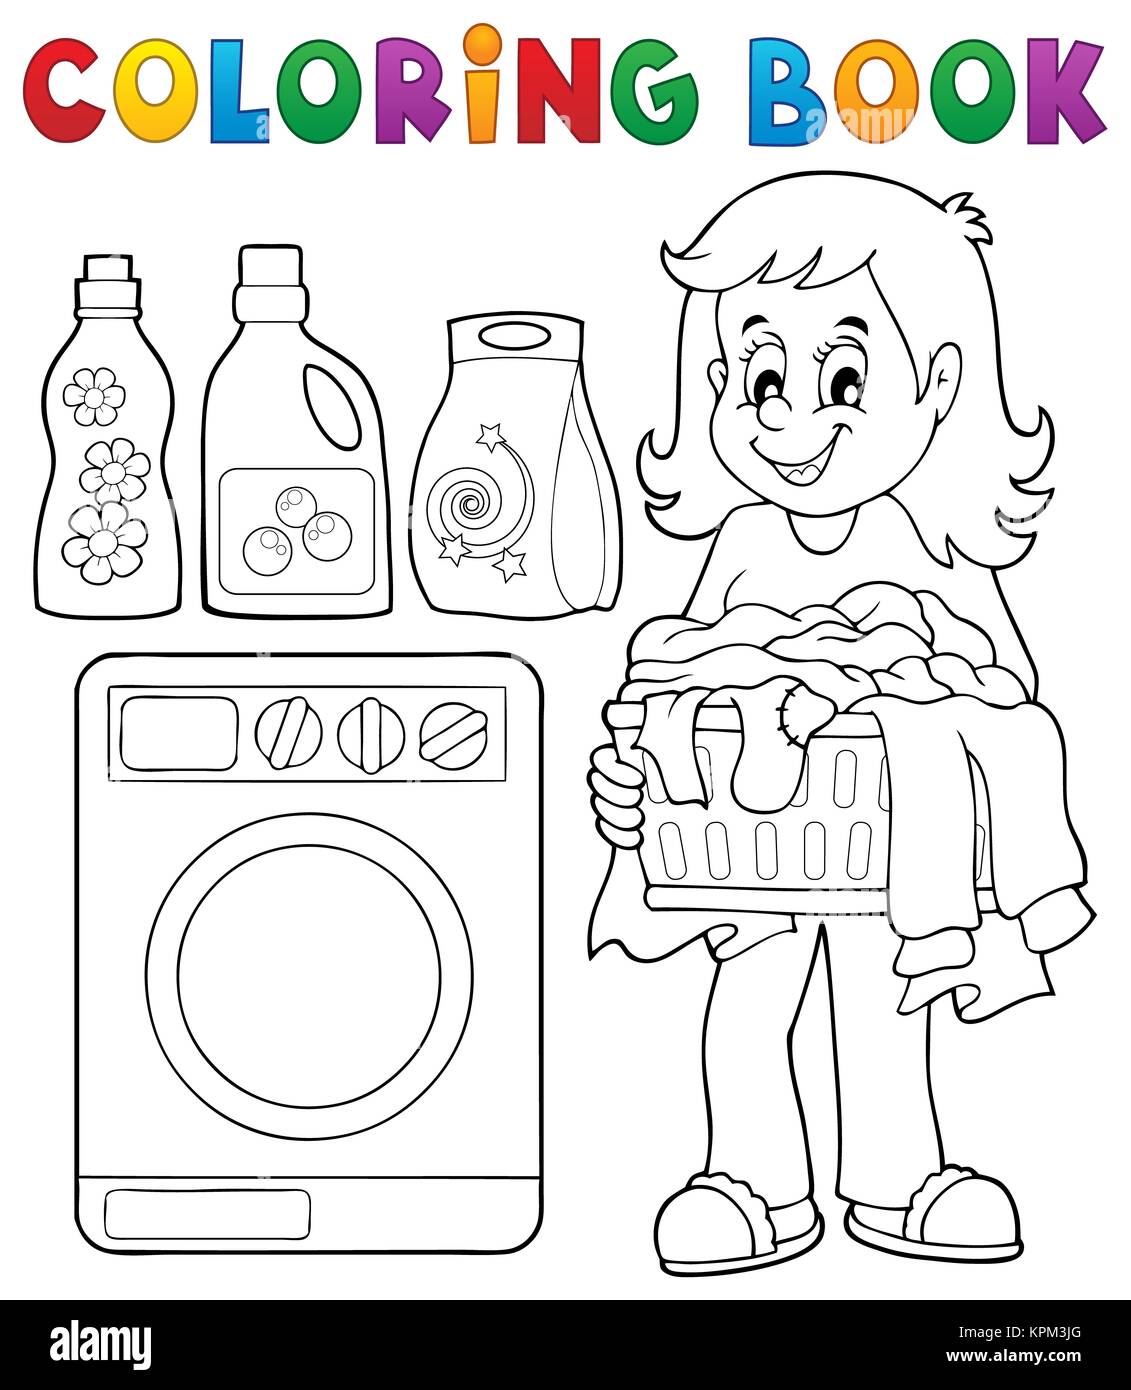 Coloring book laundry theme 1 Stock Photo - Alamy